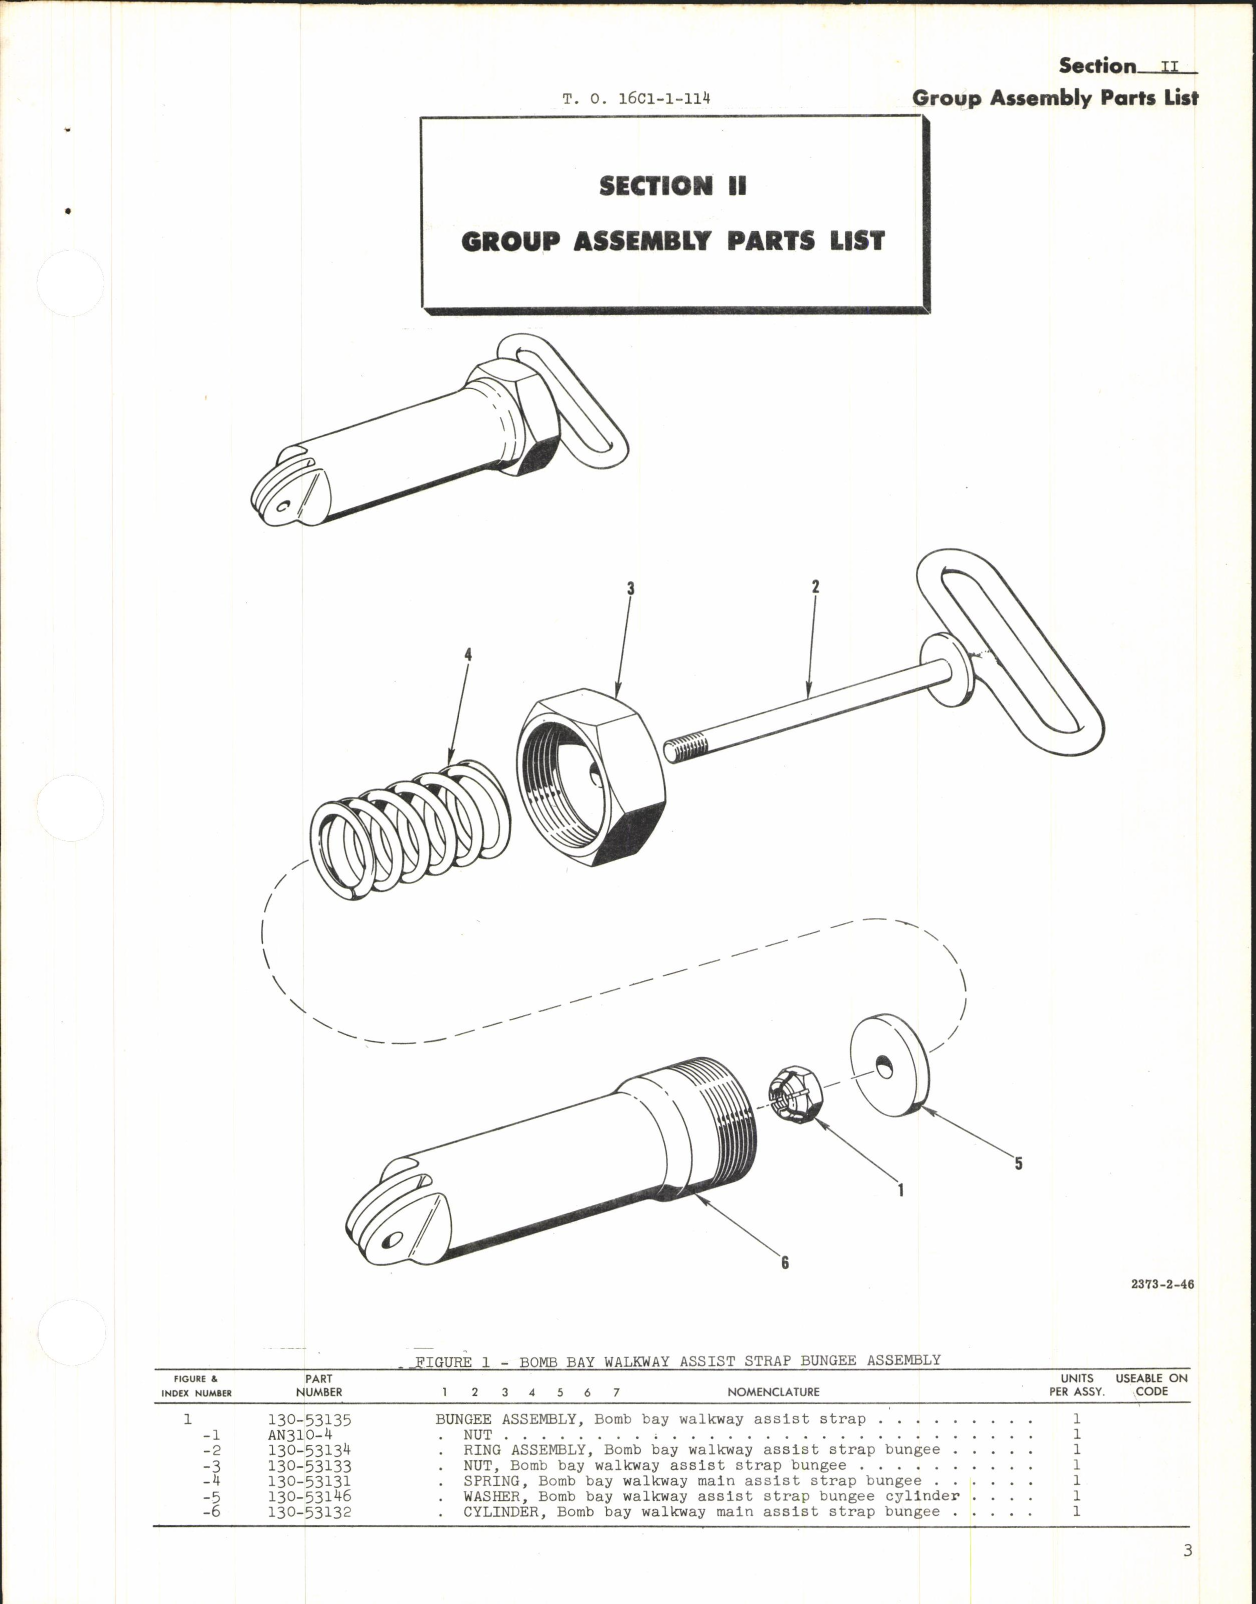 Sample page 7 from AirCorps Library document: Illustrated Parts Breakdown for Bungee Assemblies